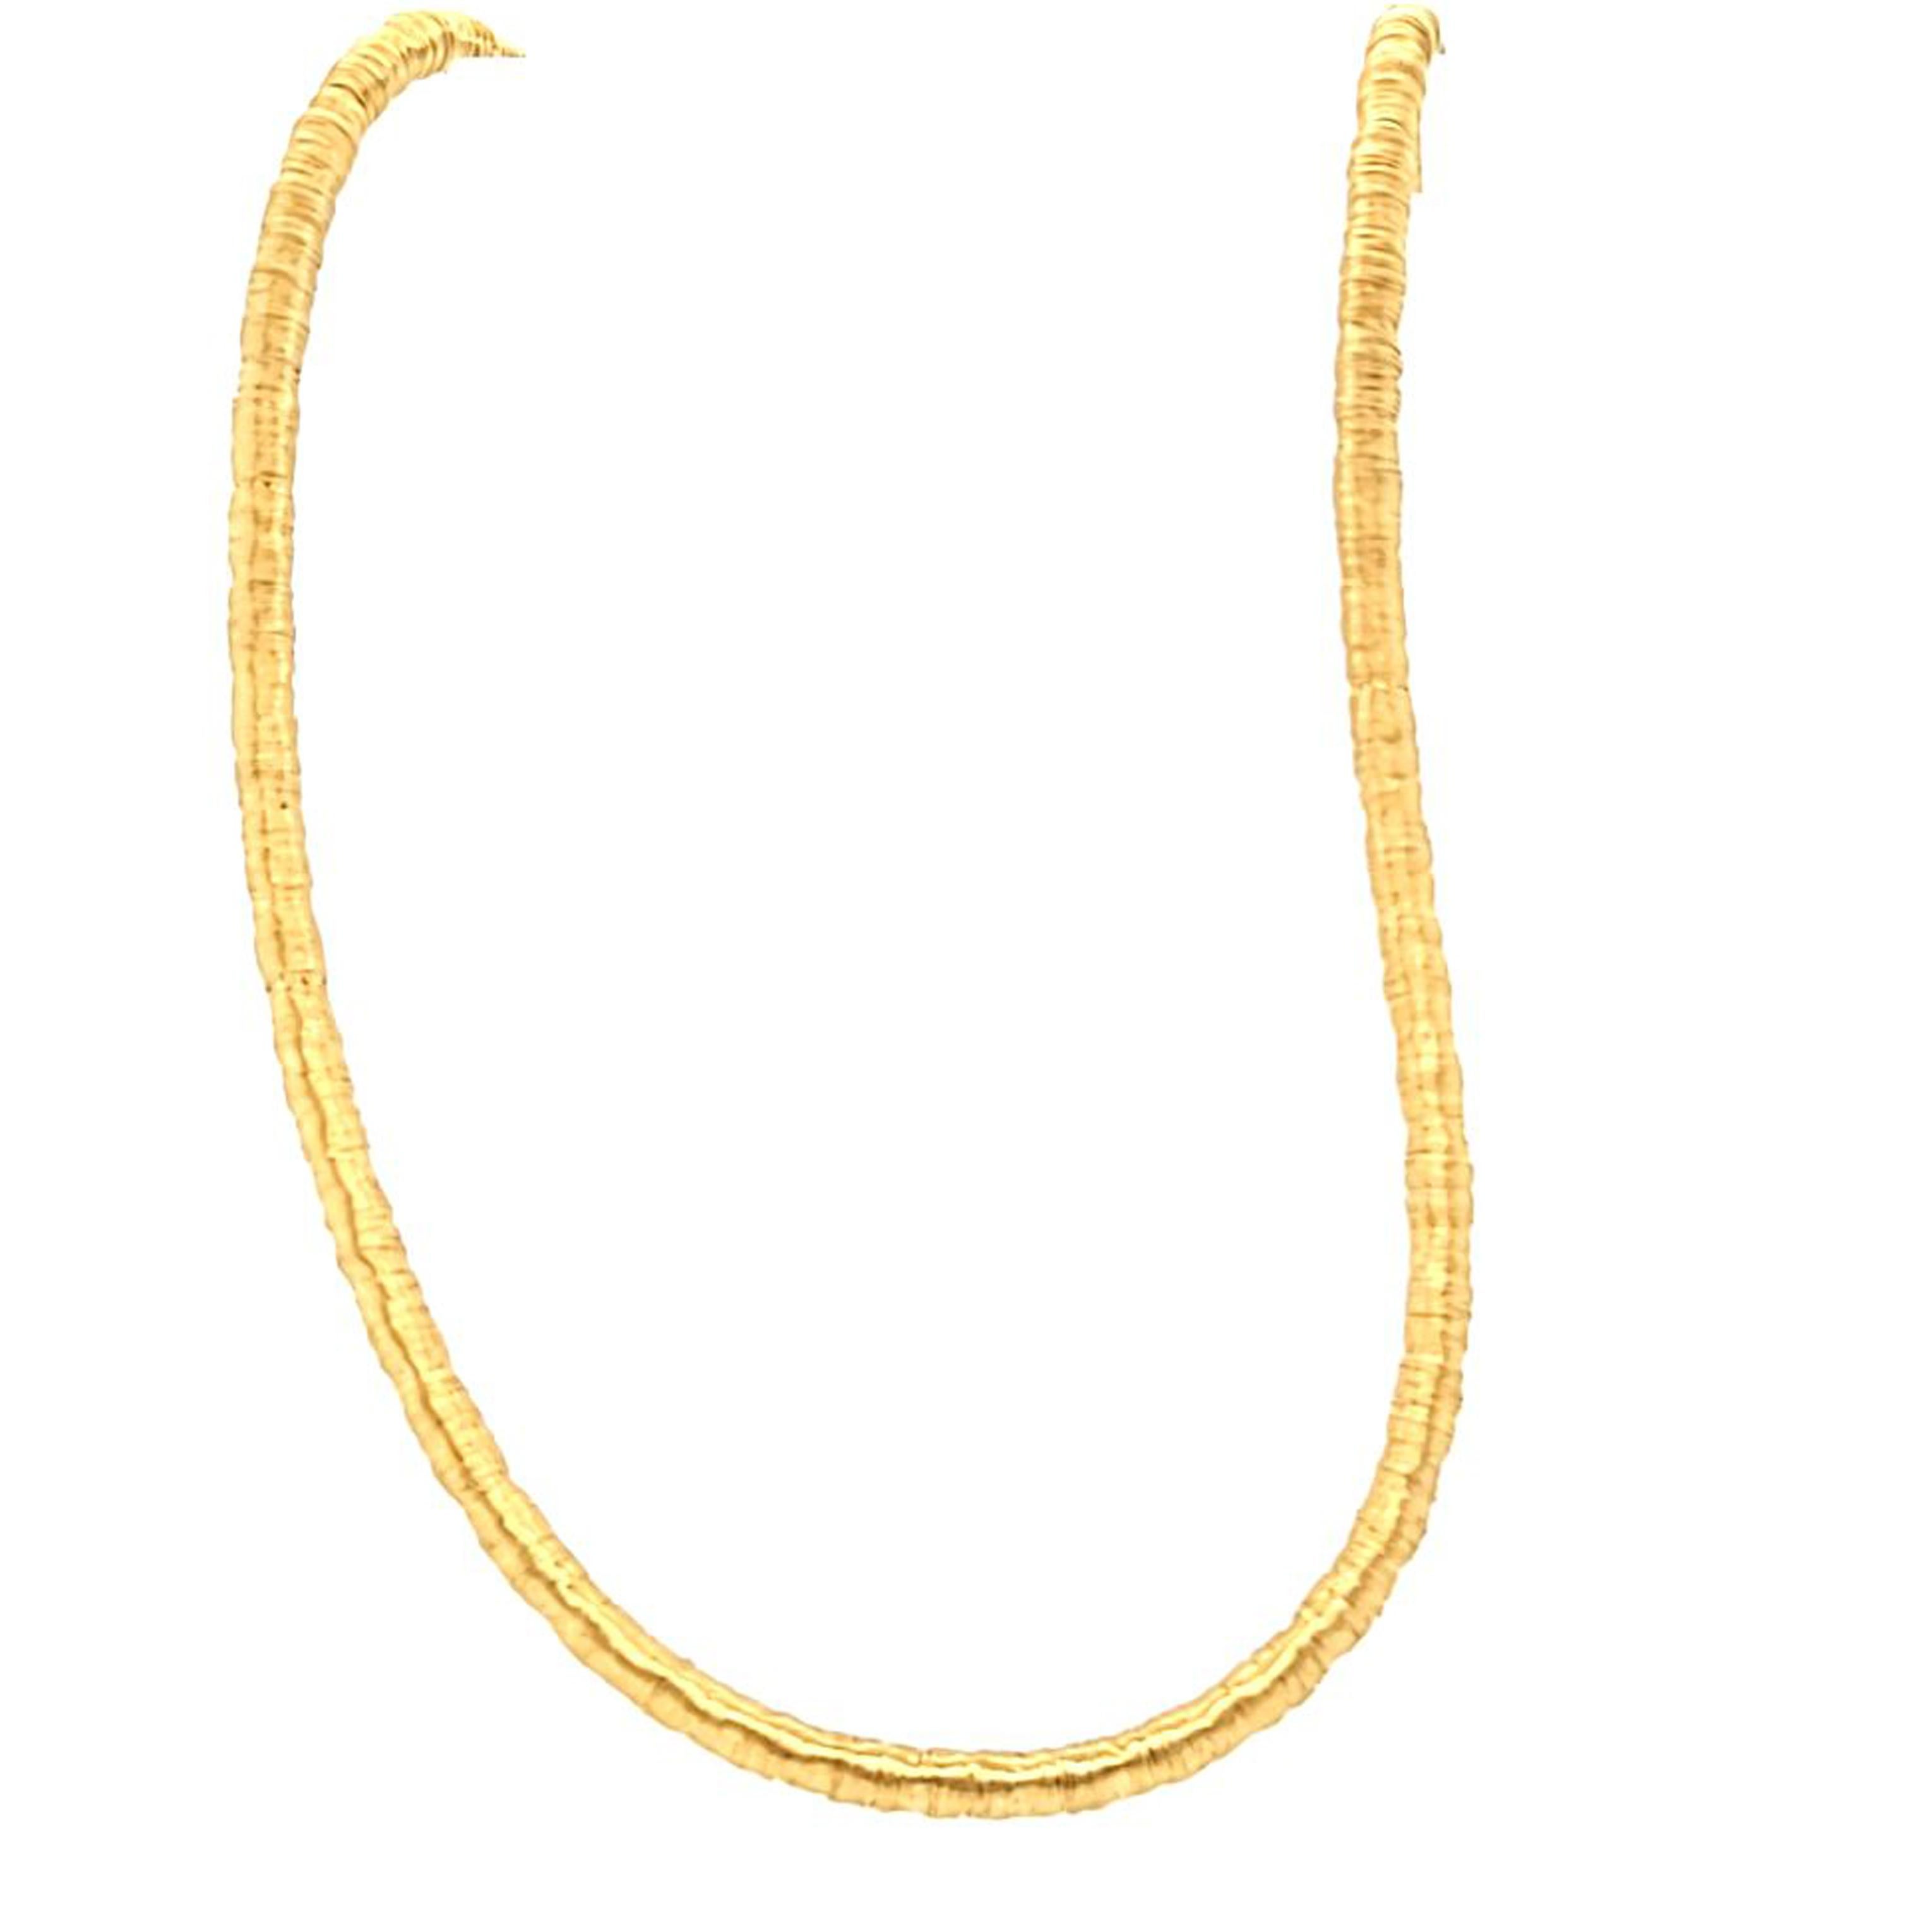 18 Karat Yellow Gold 4mm Coil Textured Necklace Consisting Measuring 16 Inches Long with Lobster Clasp. Finished Weight is 27.1 Grams.